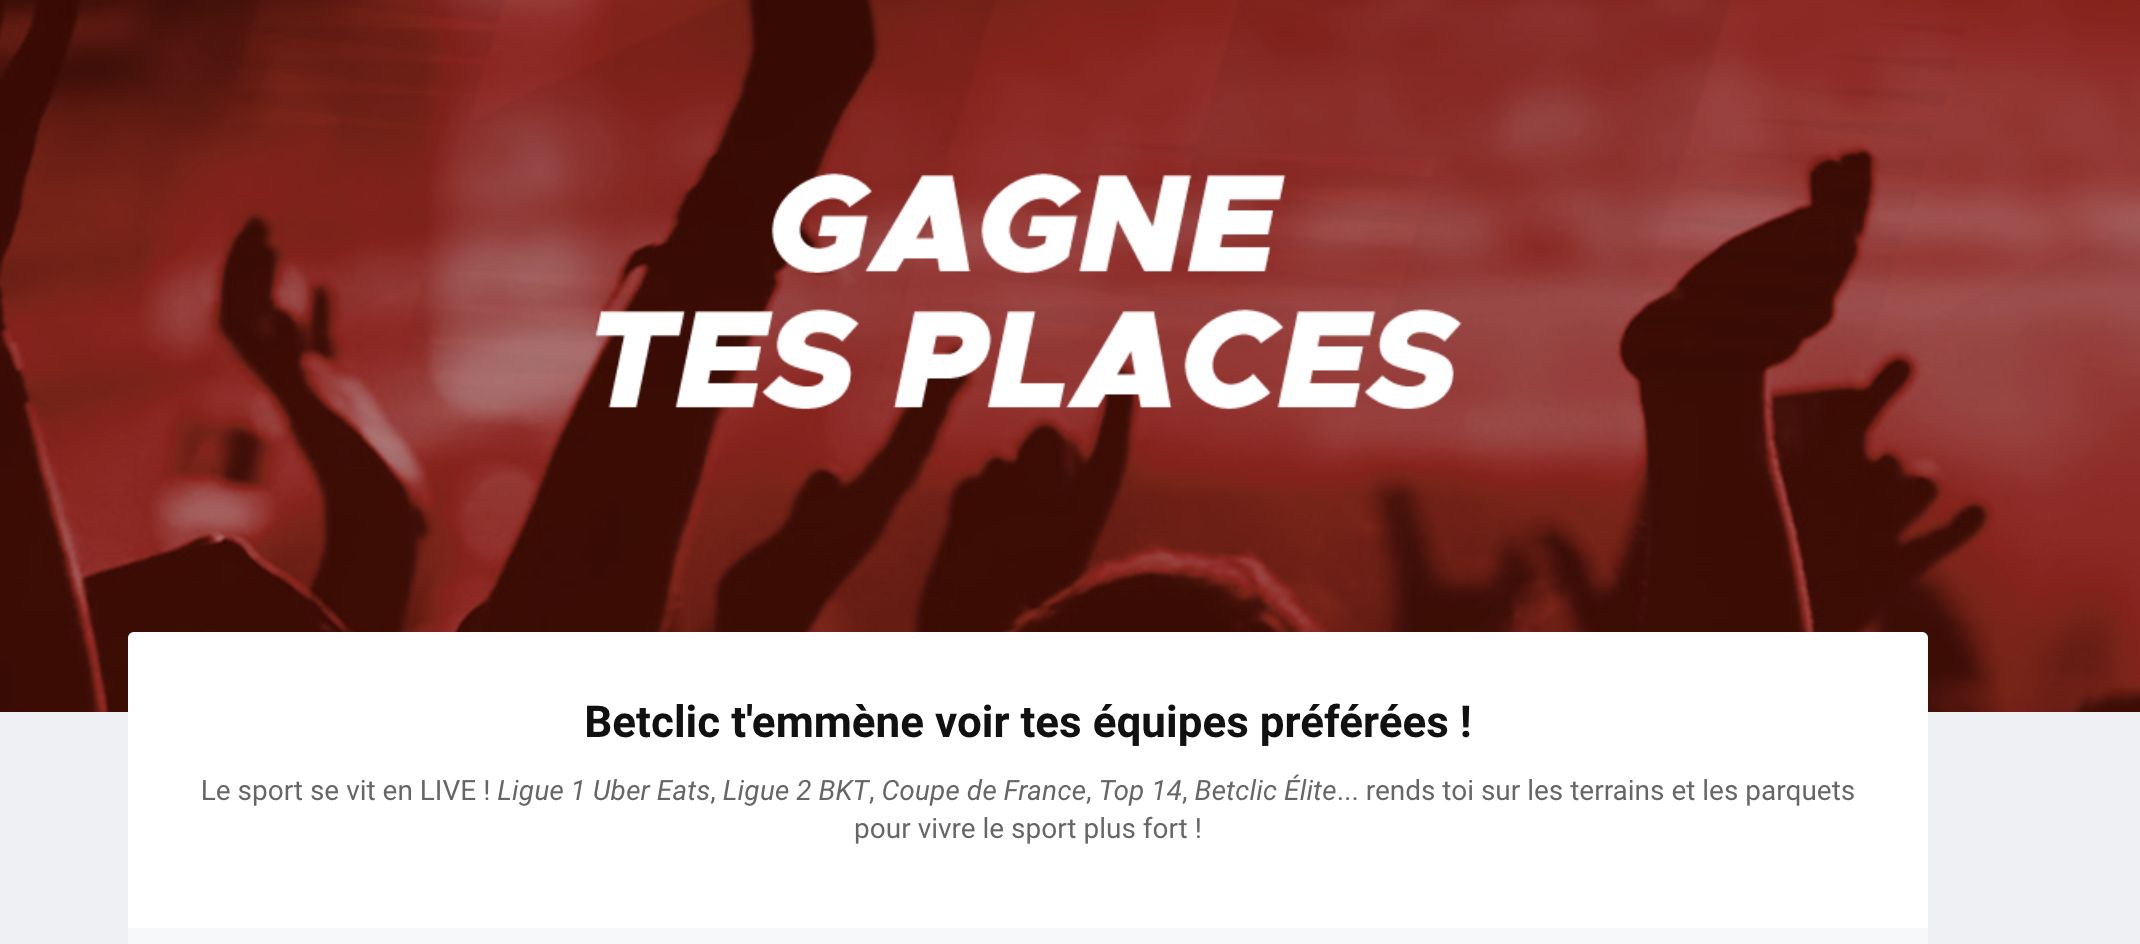 Gagne tes places